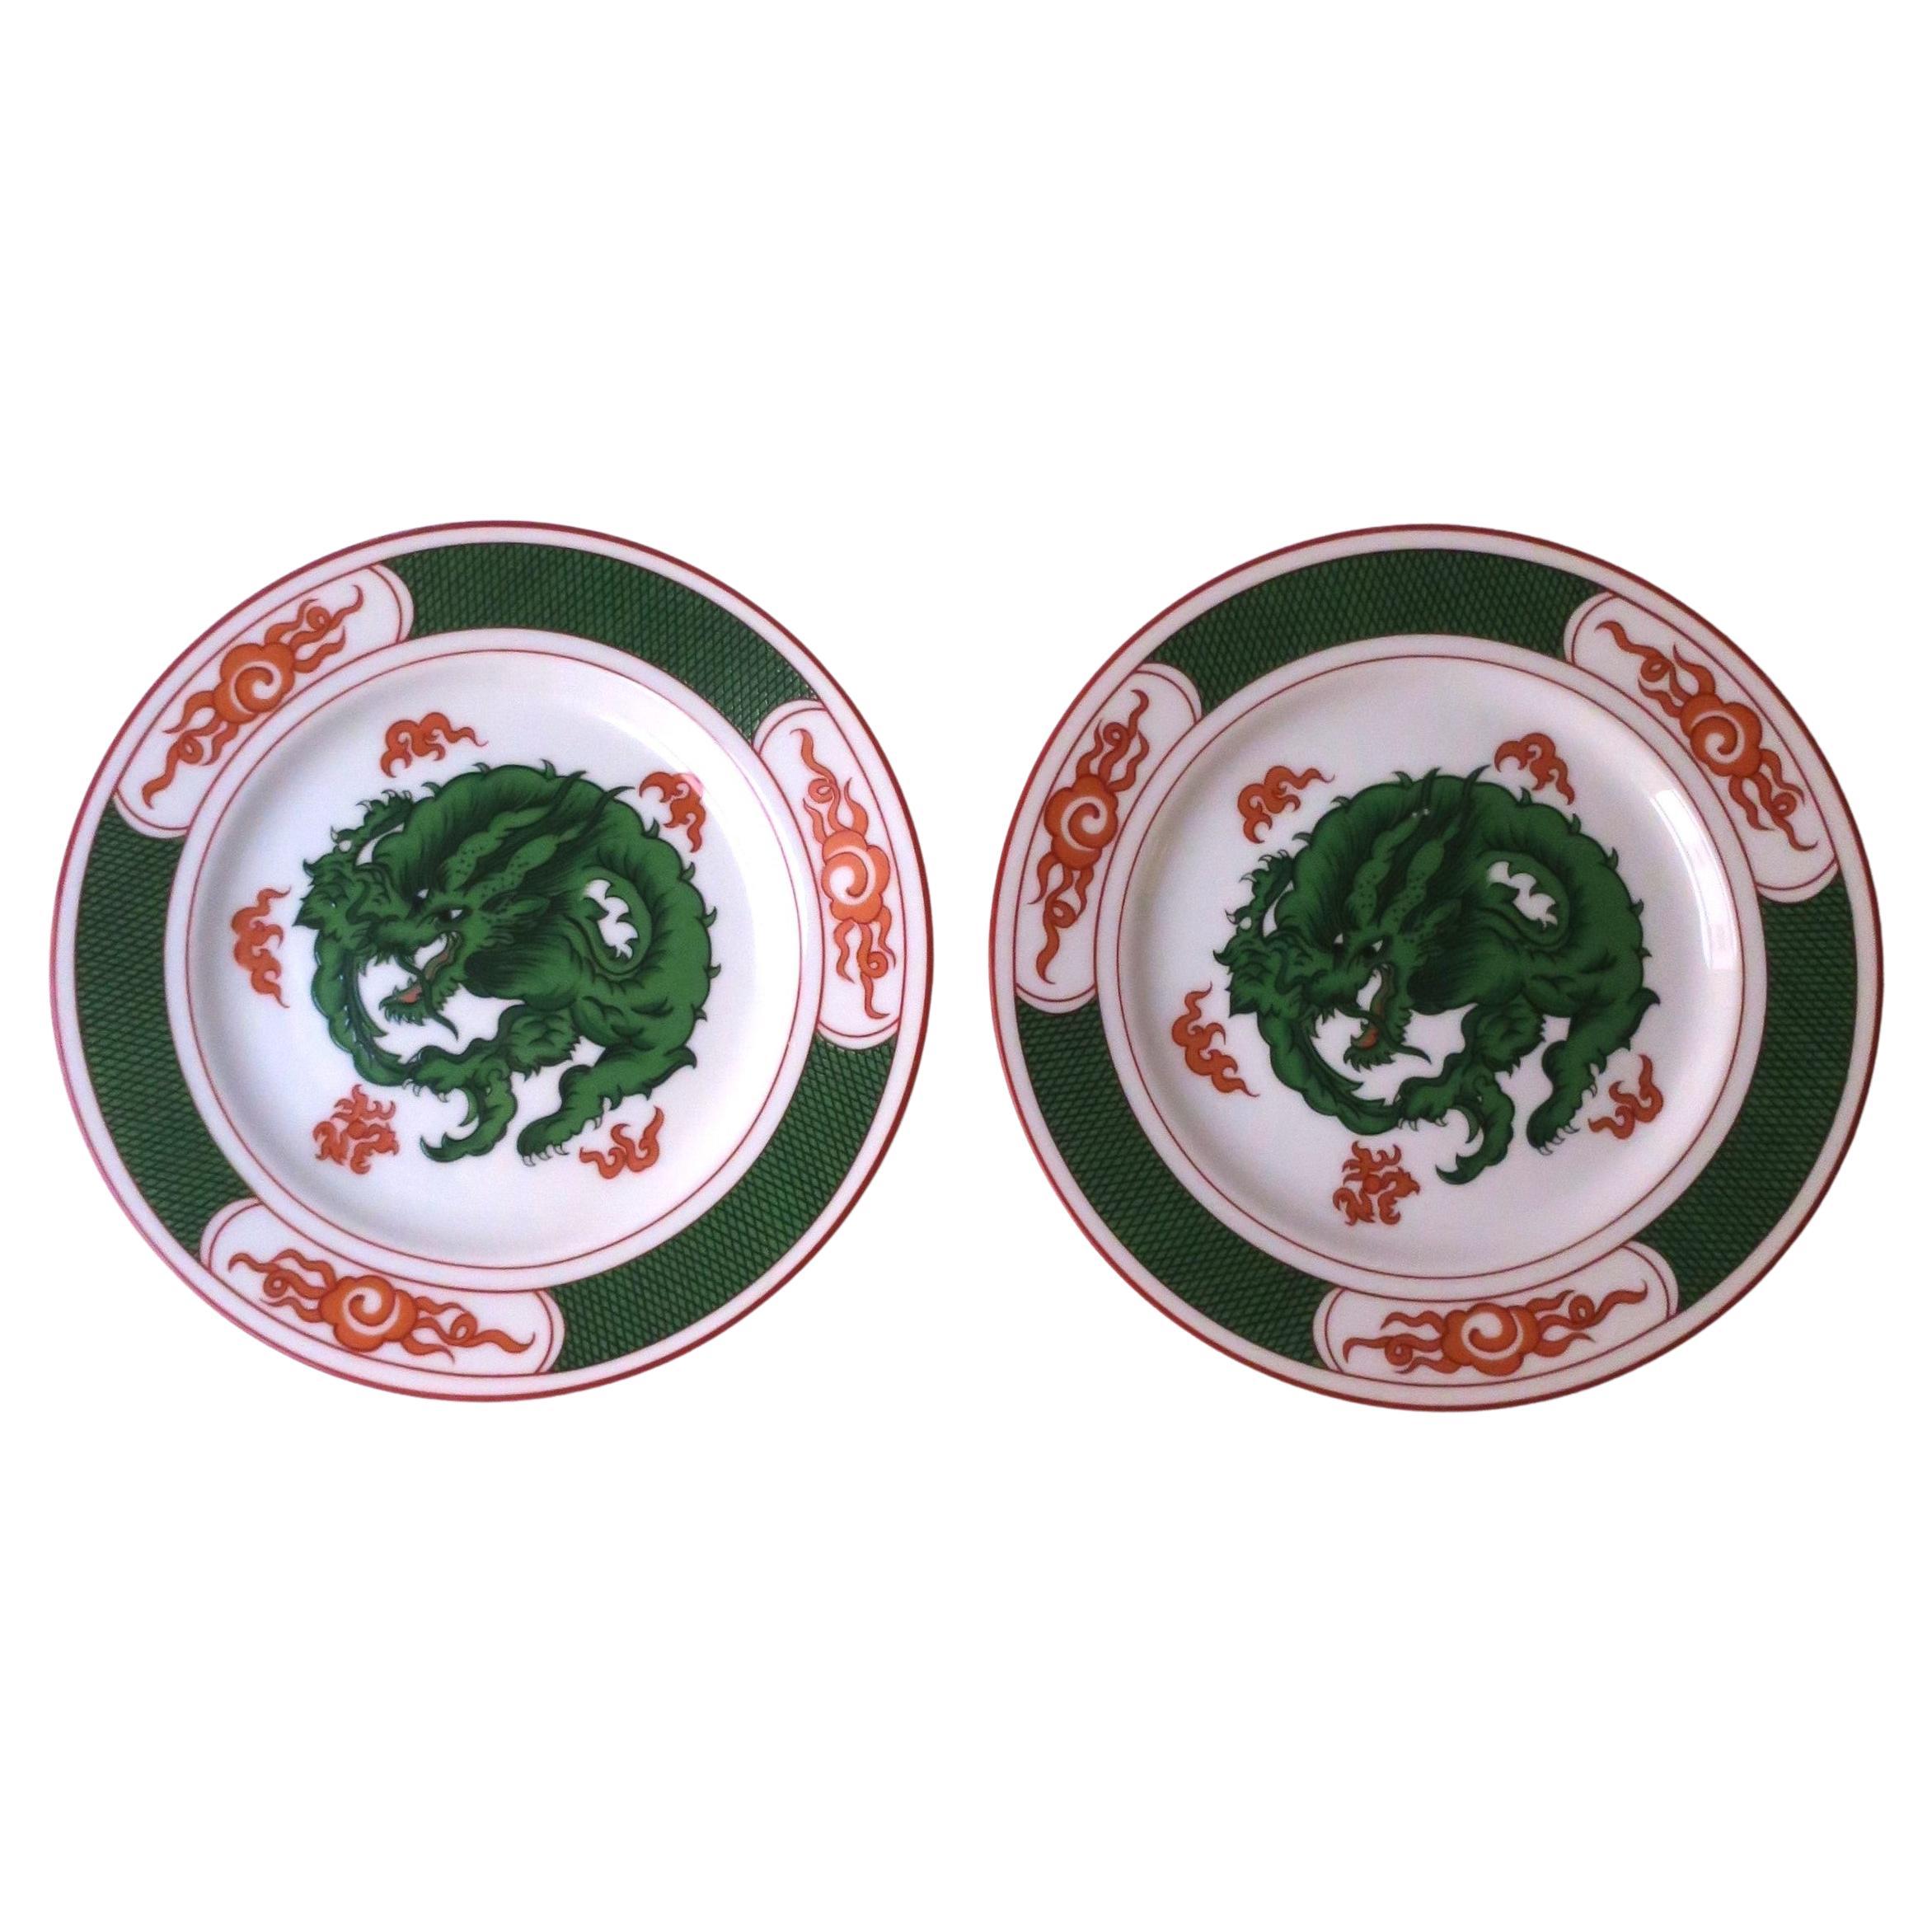 A vintage pair of two (2) white porcelain plates with an emerald green dragon design at center and red/orange flames around, circa late-20th century, 1980s. Plates have a striking dragon design in beautiful green and red/orange flames hues around. A